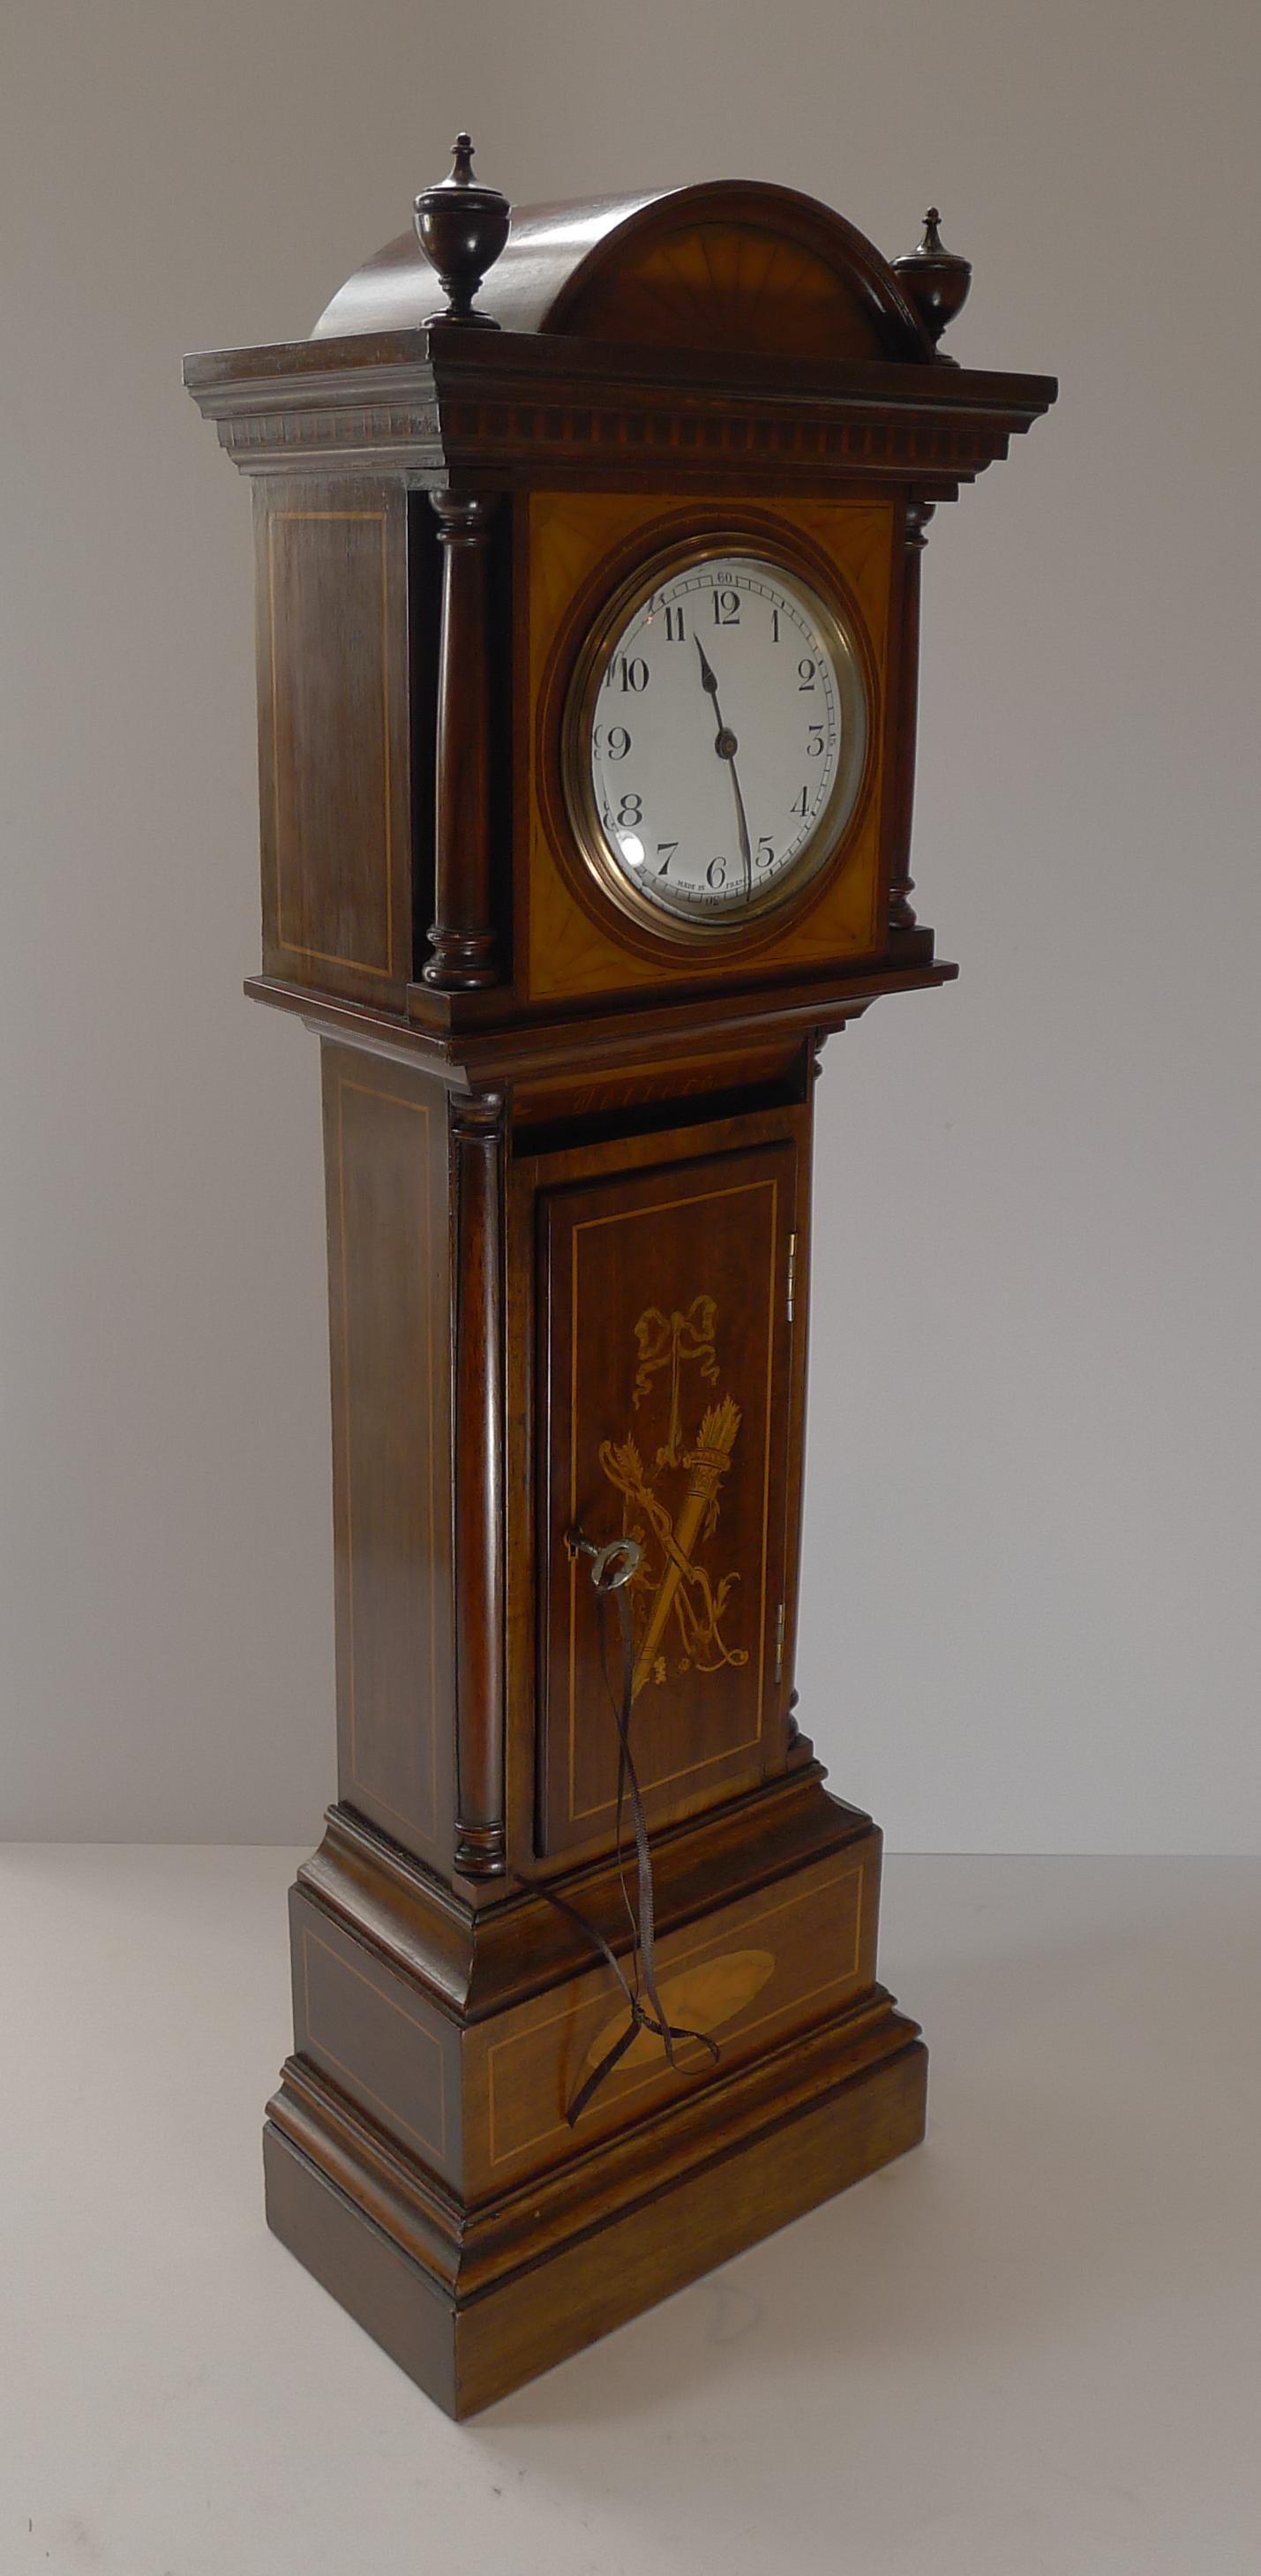 Early 20th Century Novelty Antique English Letters / Postal / Mail Box, Longcase Clock Form, c.1910